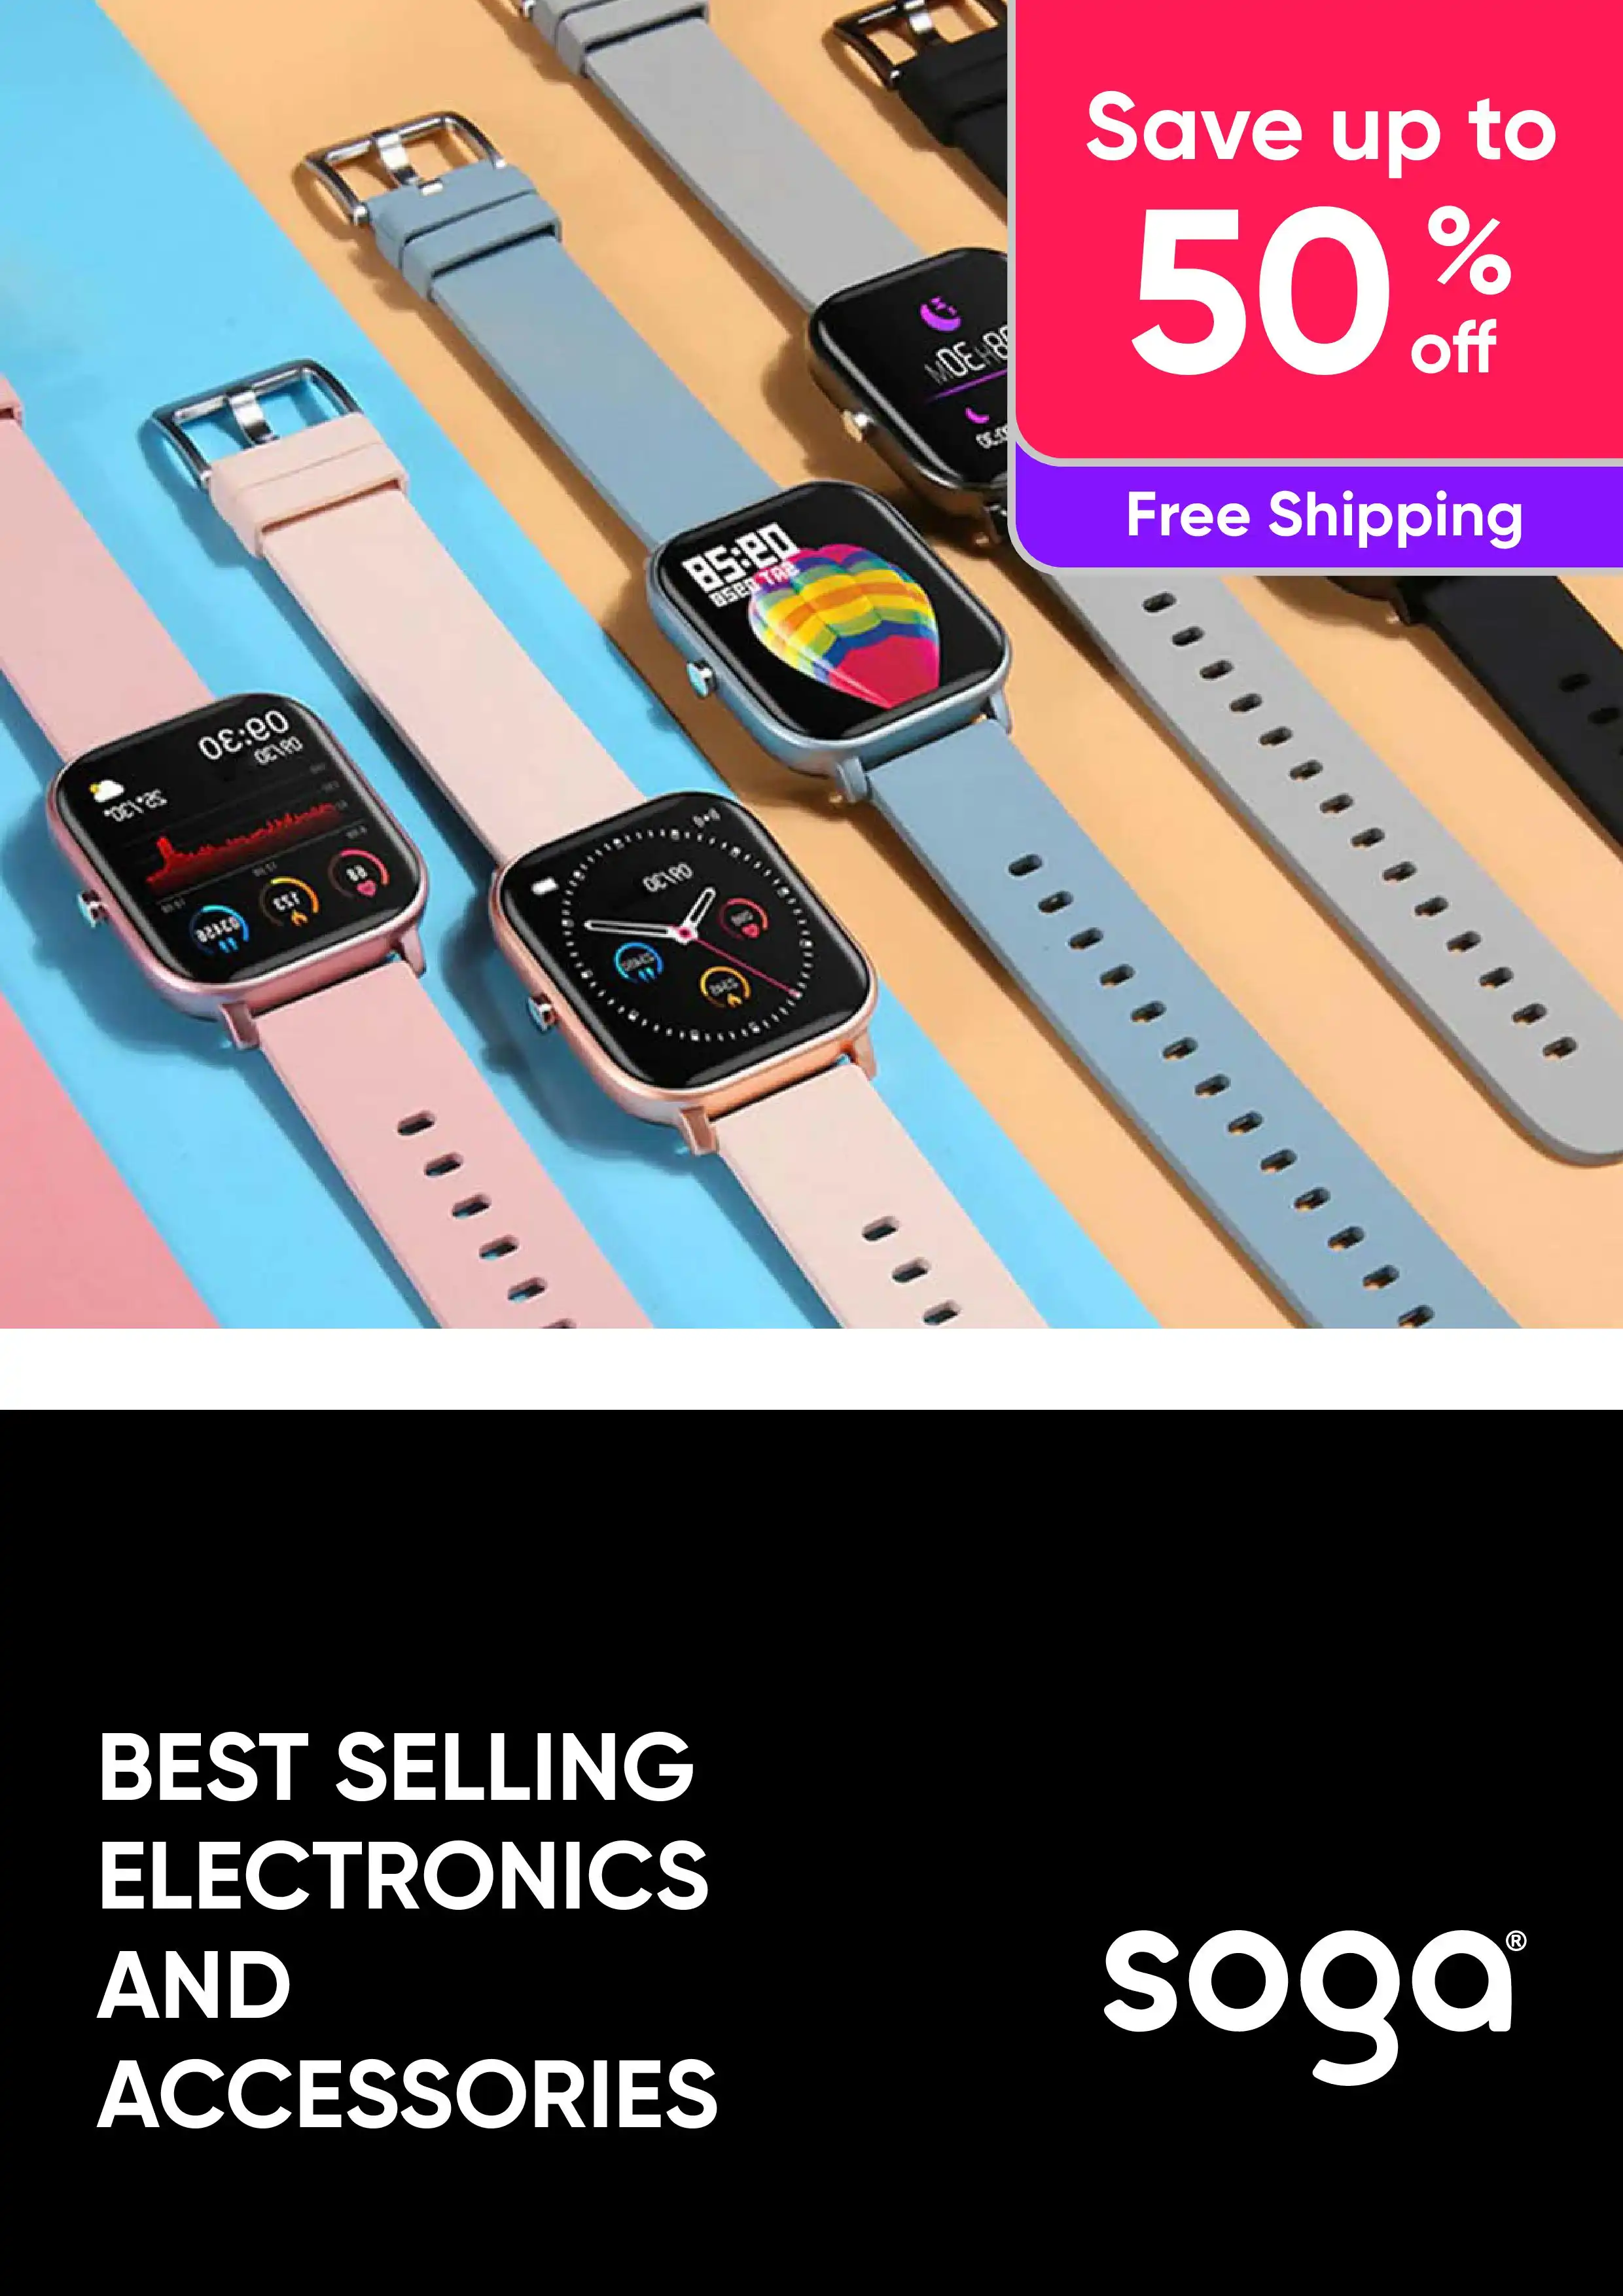 Best Selling Electronics and Accessories - Save Up To 50% + Free Shipping